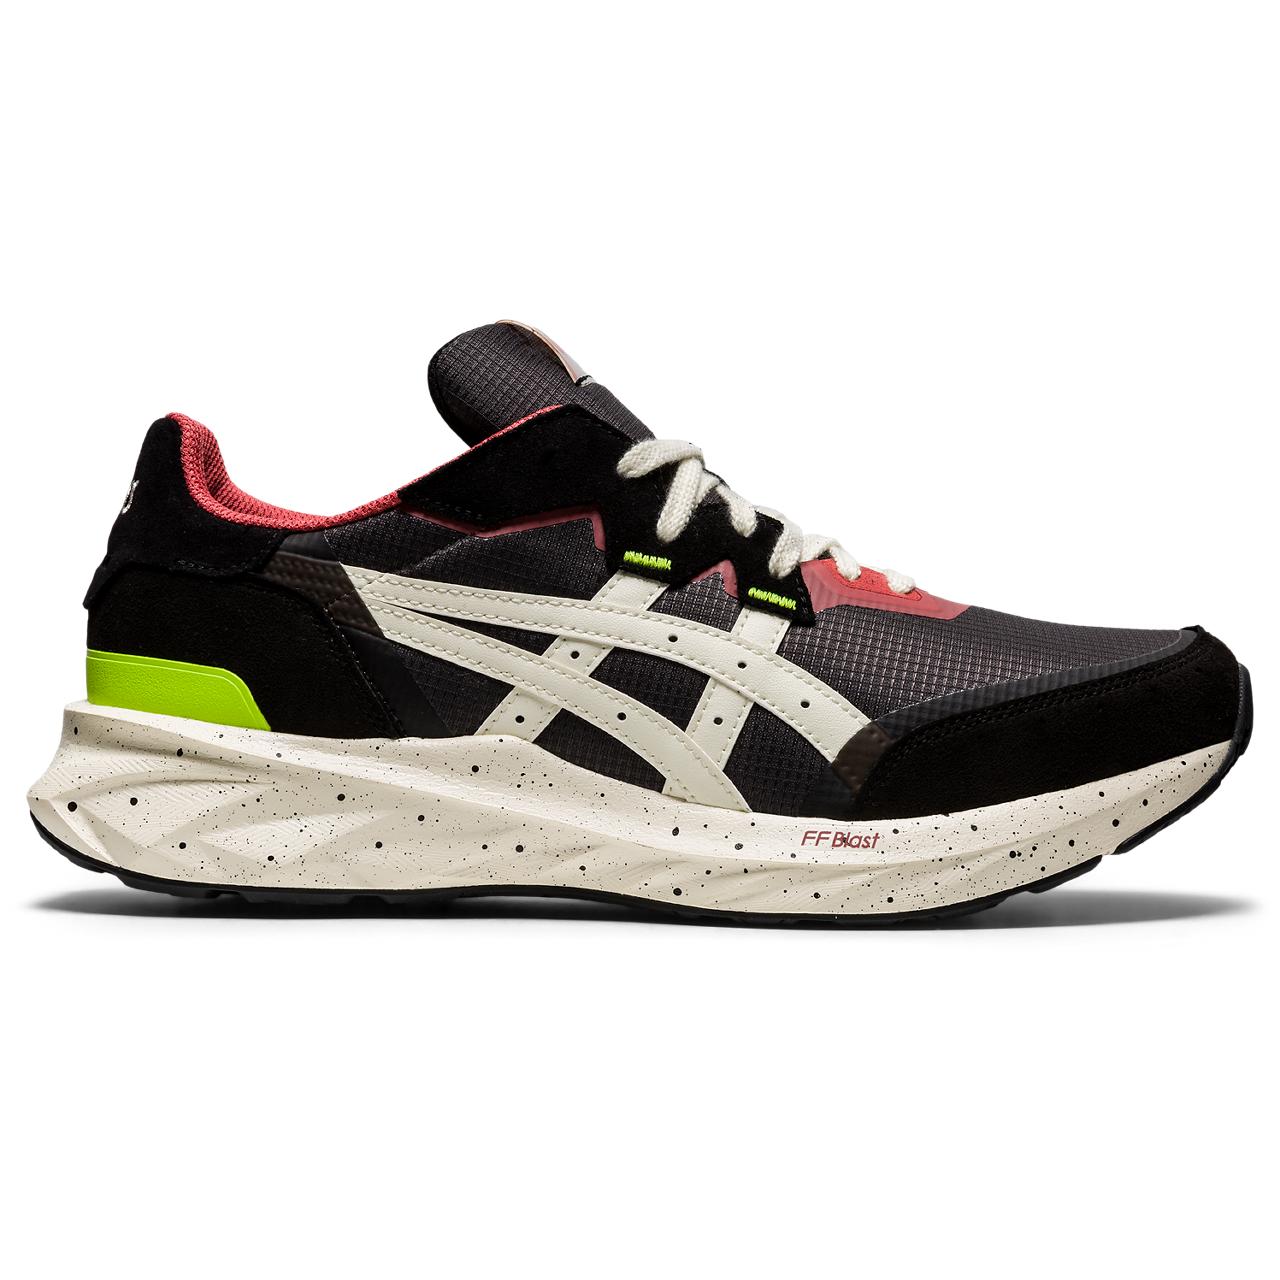 ASICS Size Guide